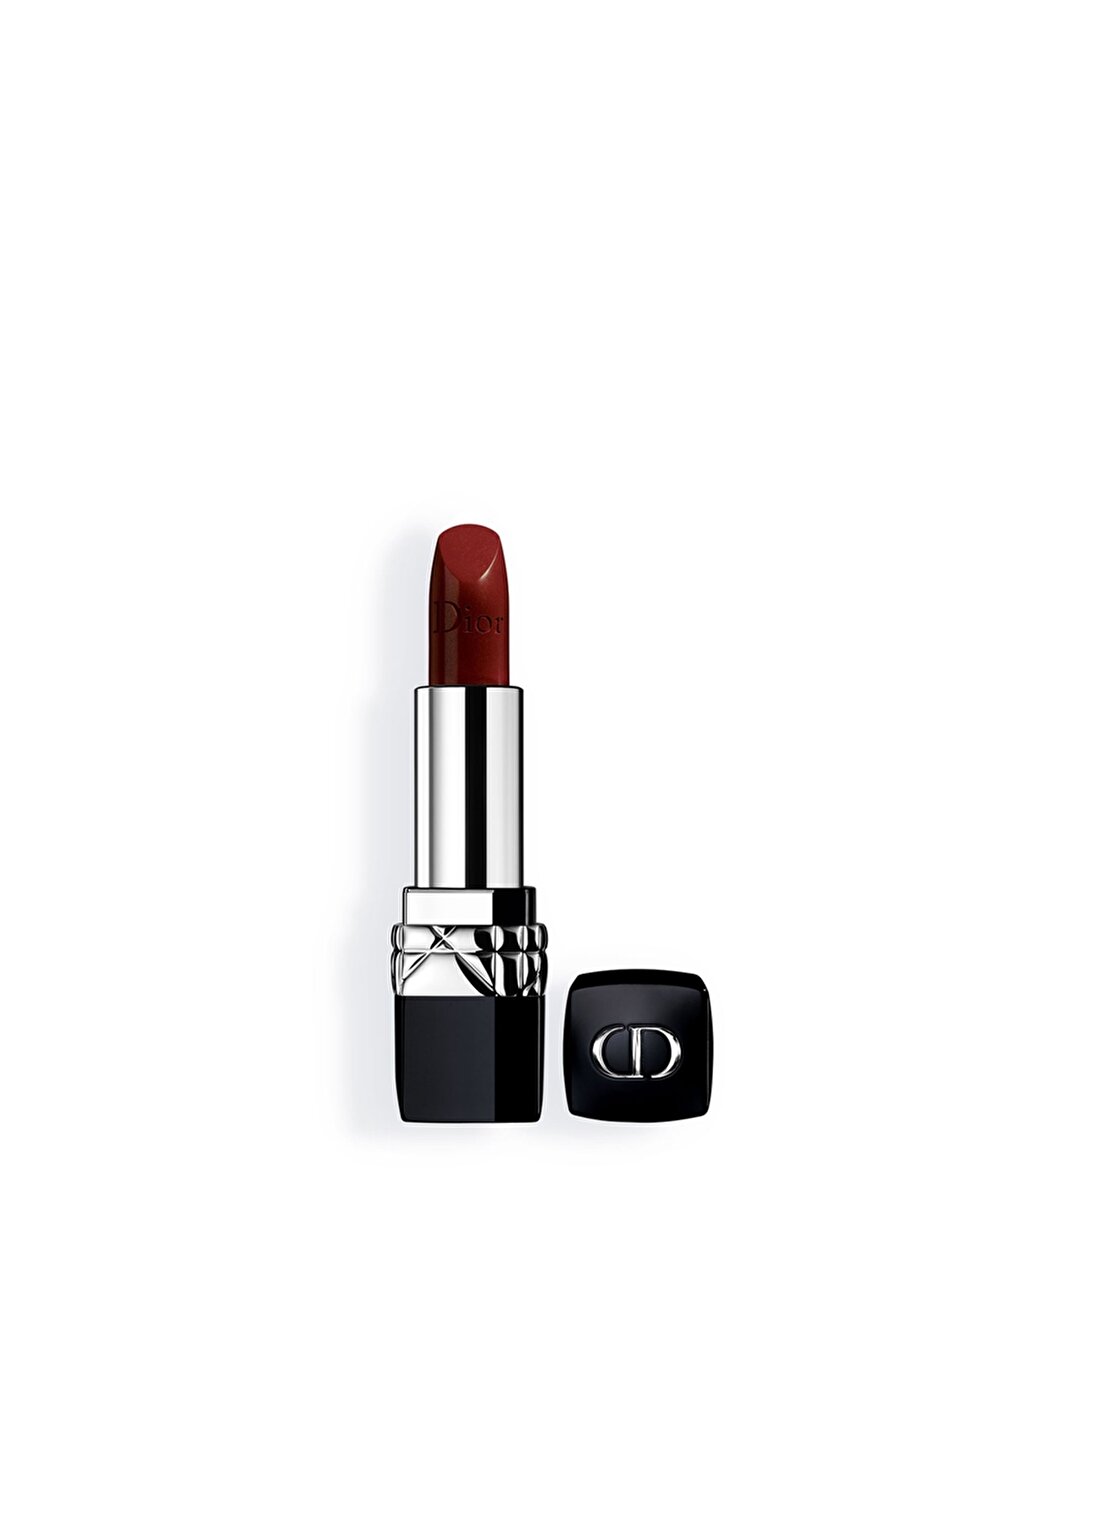 Dior Rouge Dior Limited Edition 785 Ruj